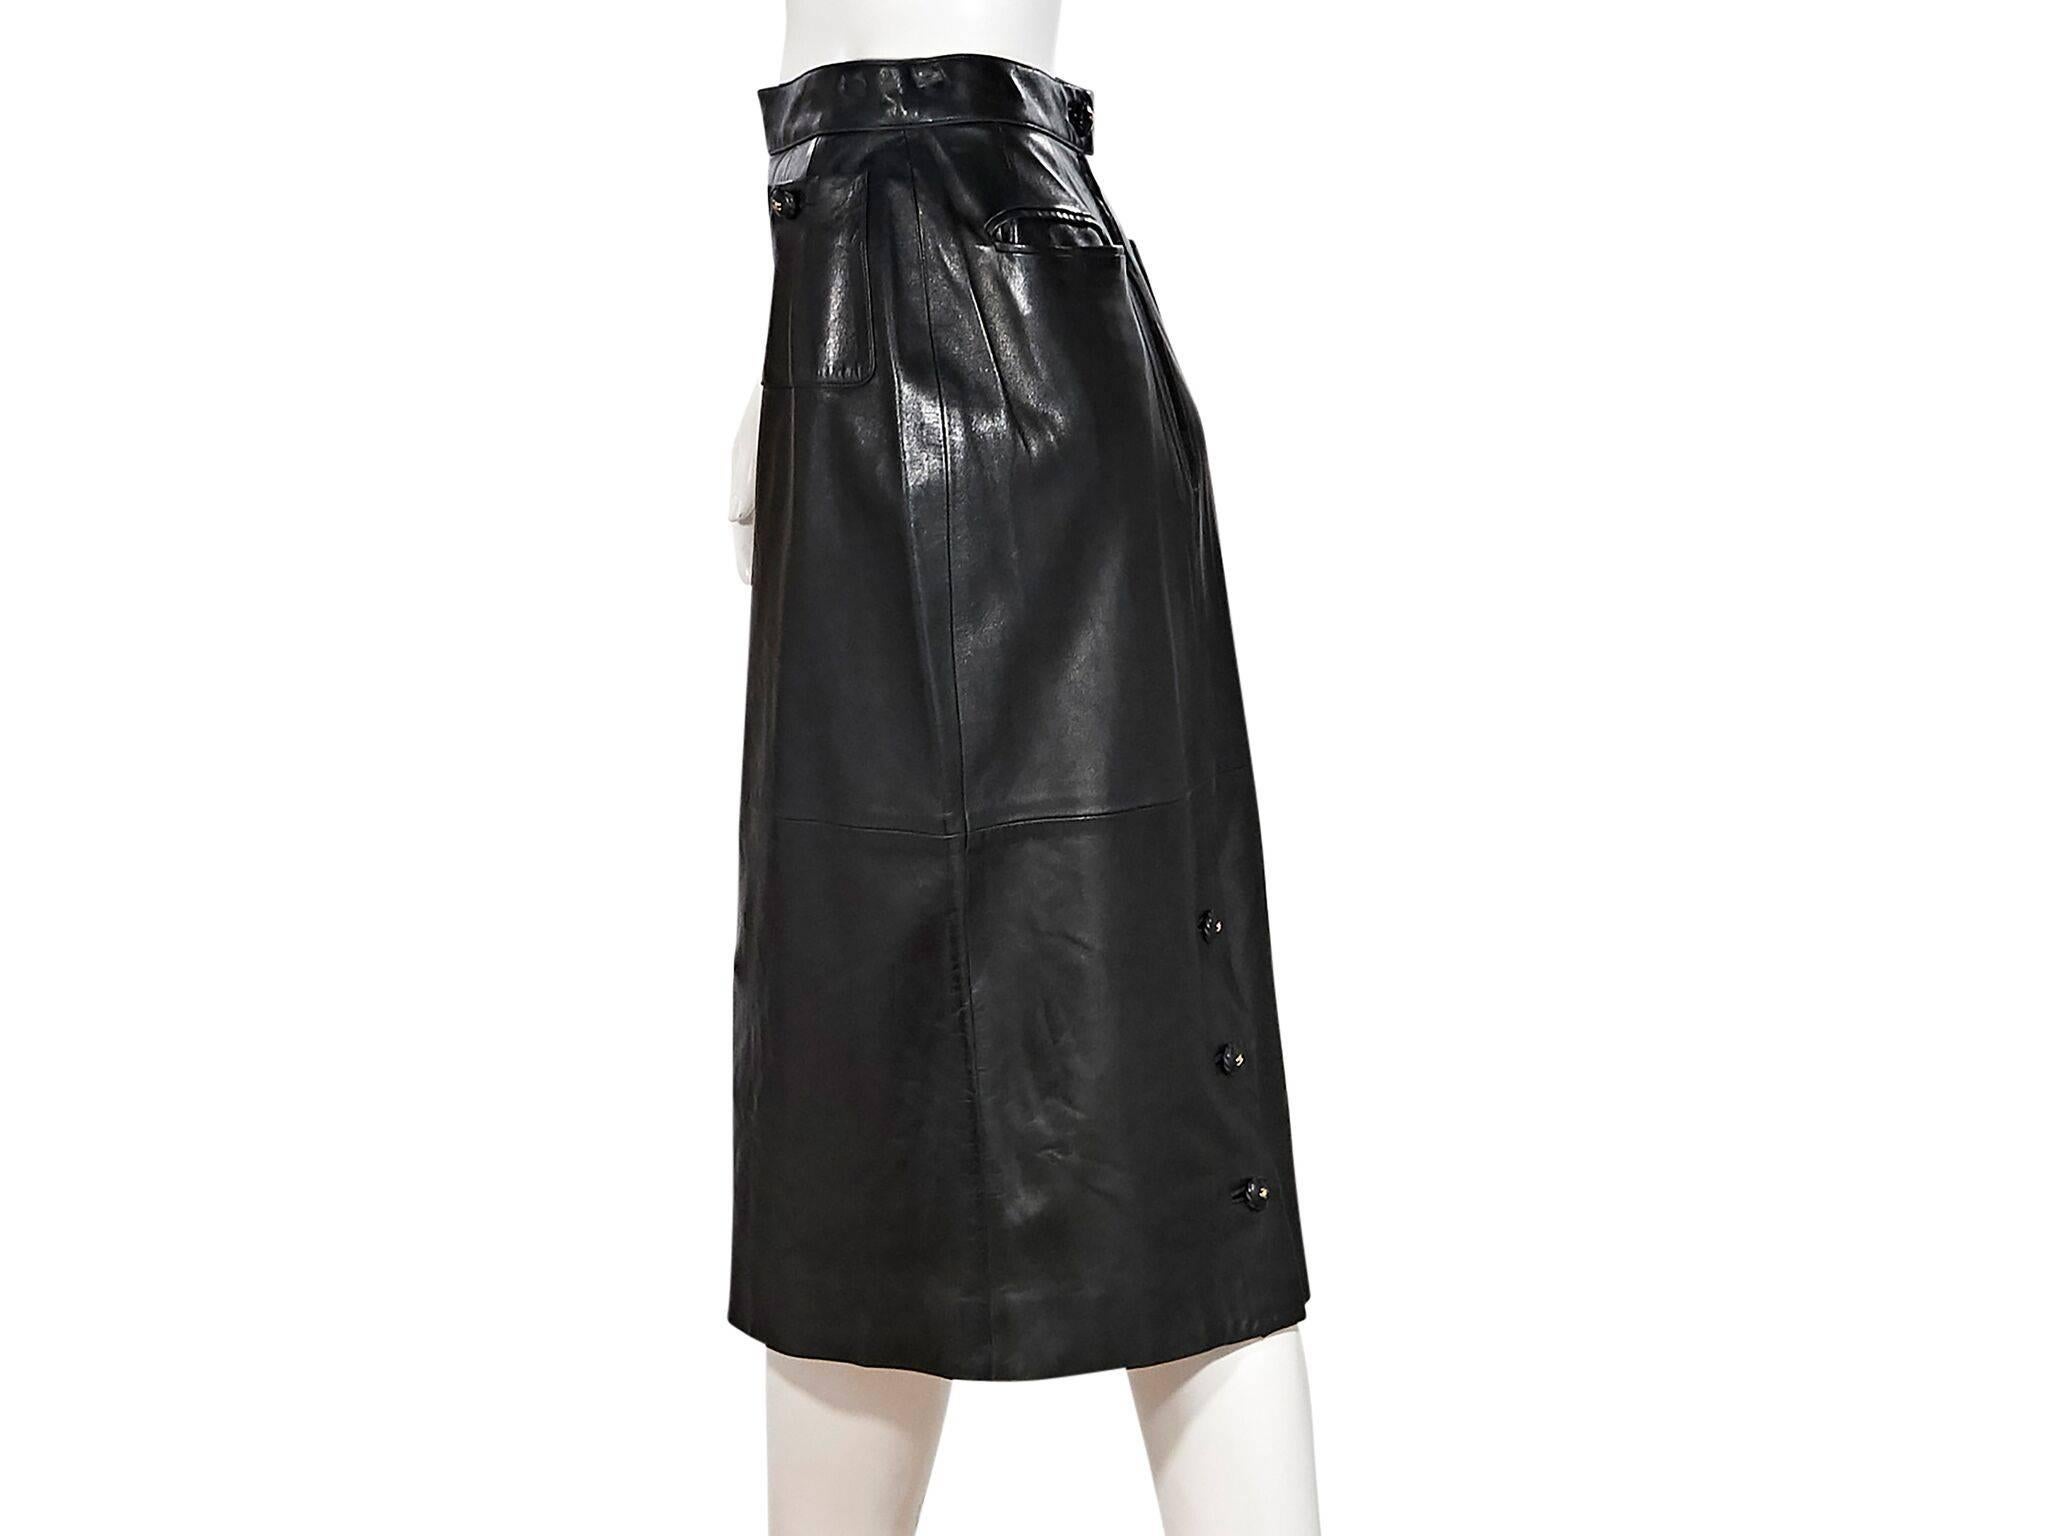 Product details:  Black leather long pencil skirt by Chanel.  Banded waist.  Waist button patch pockets.  Back button with concealed zip closure.  Back besom pockets.  Button back center hem.  28